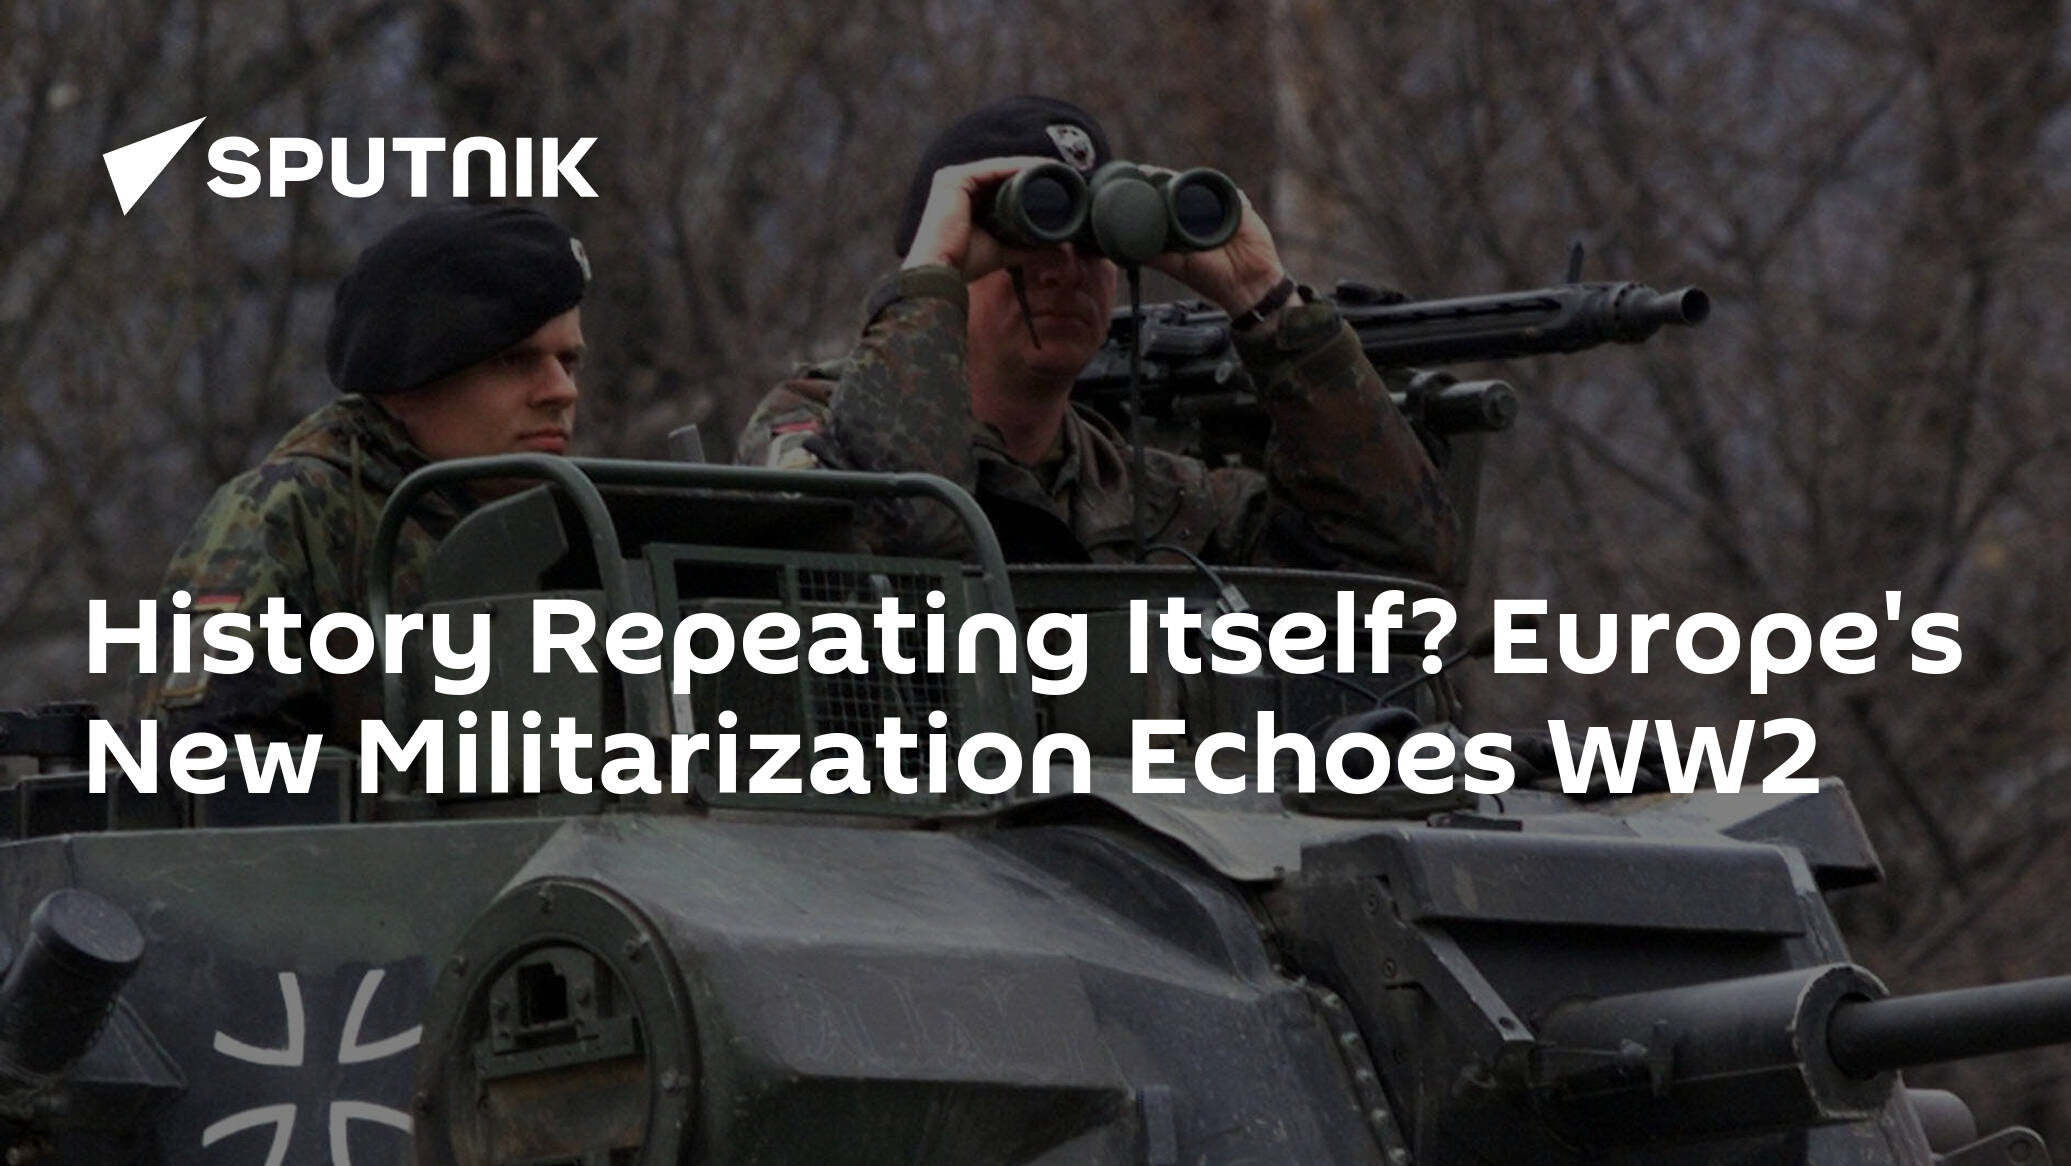 History Repeating Itself? Europe's New Militarzation Echoes WW2